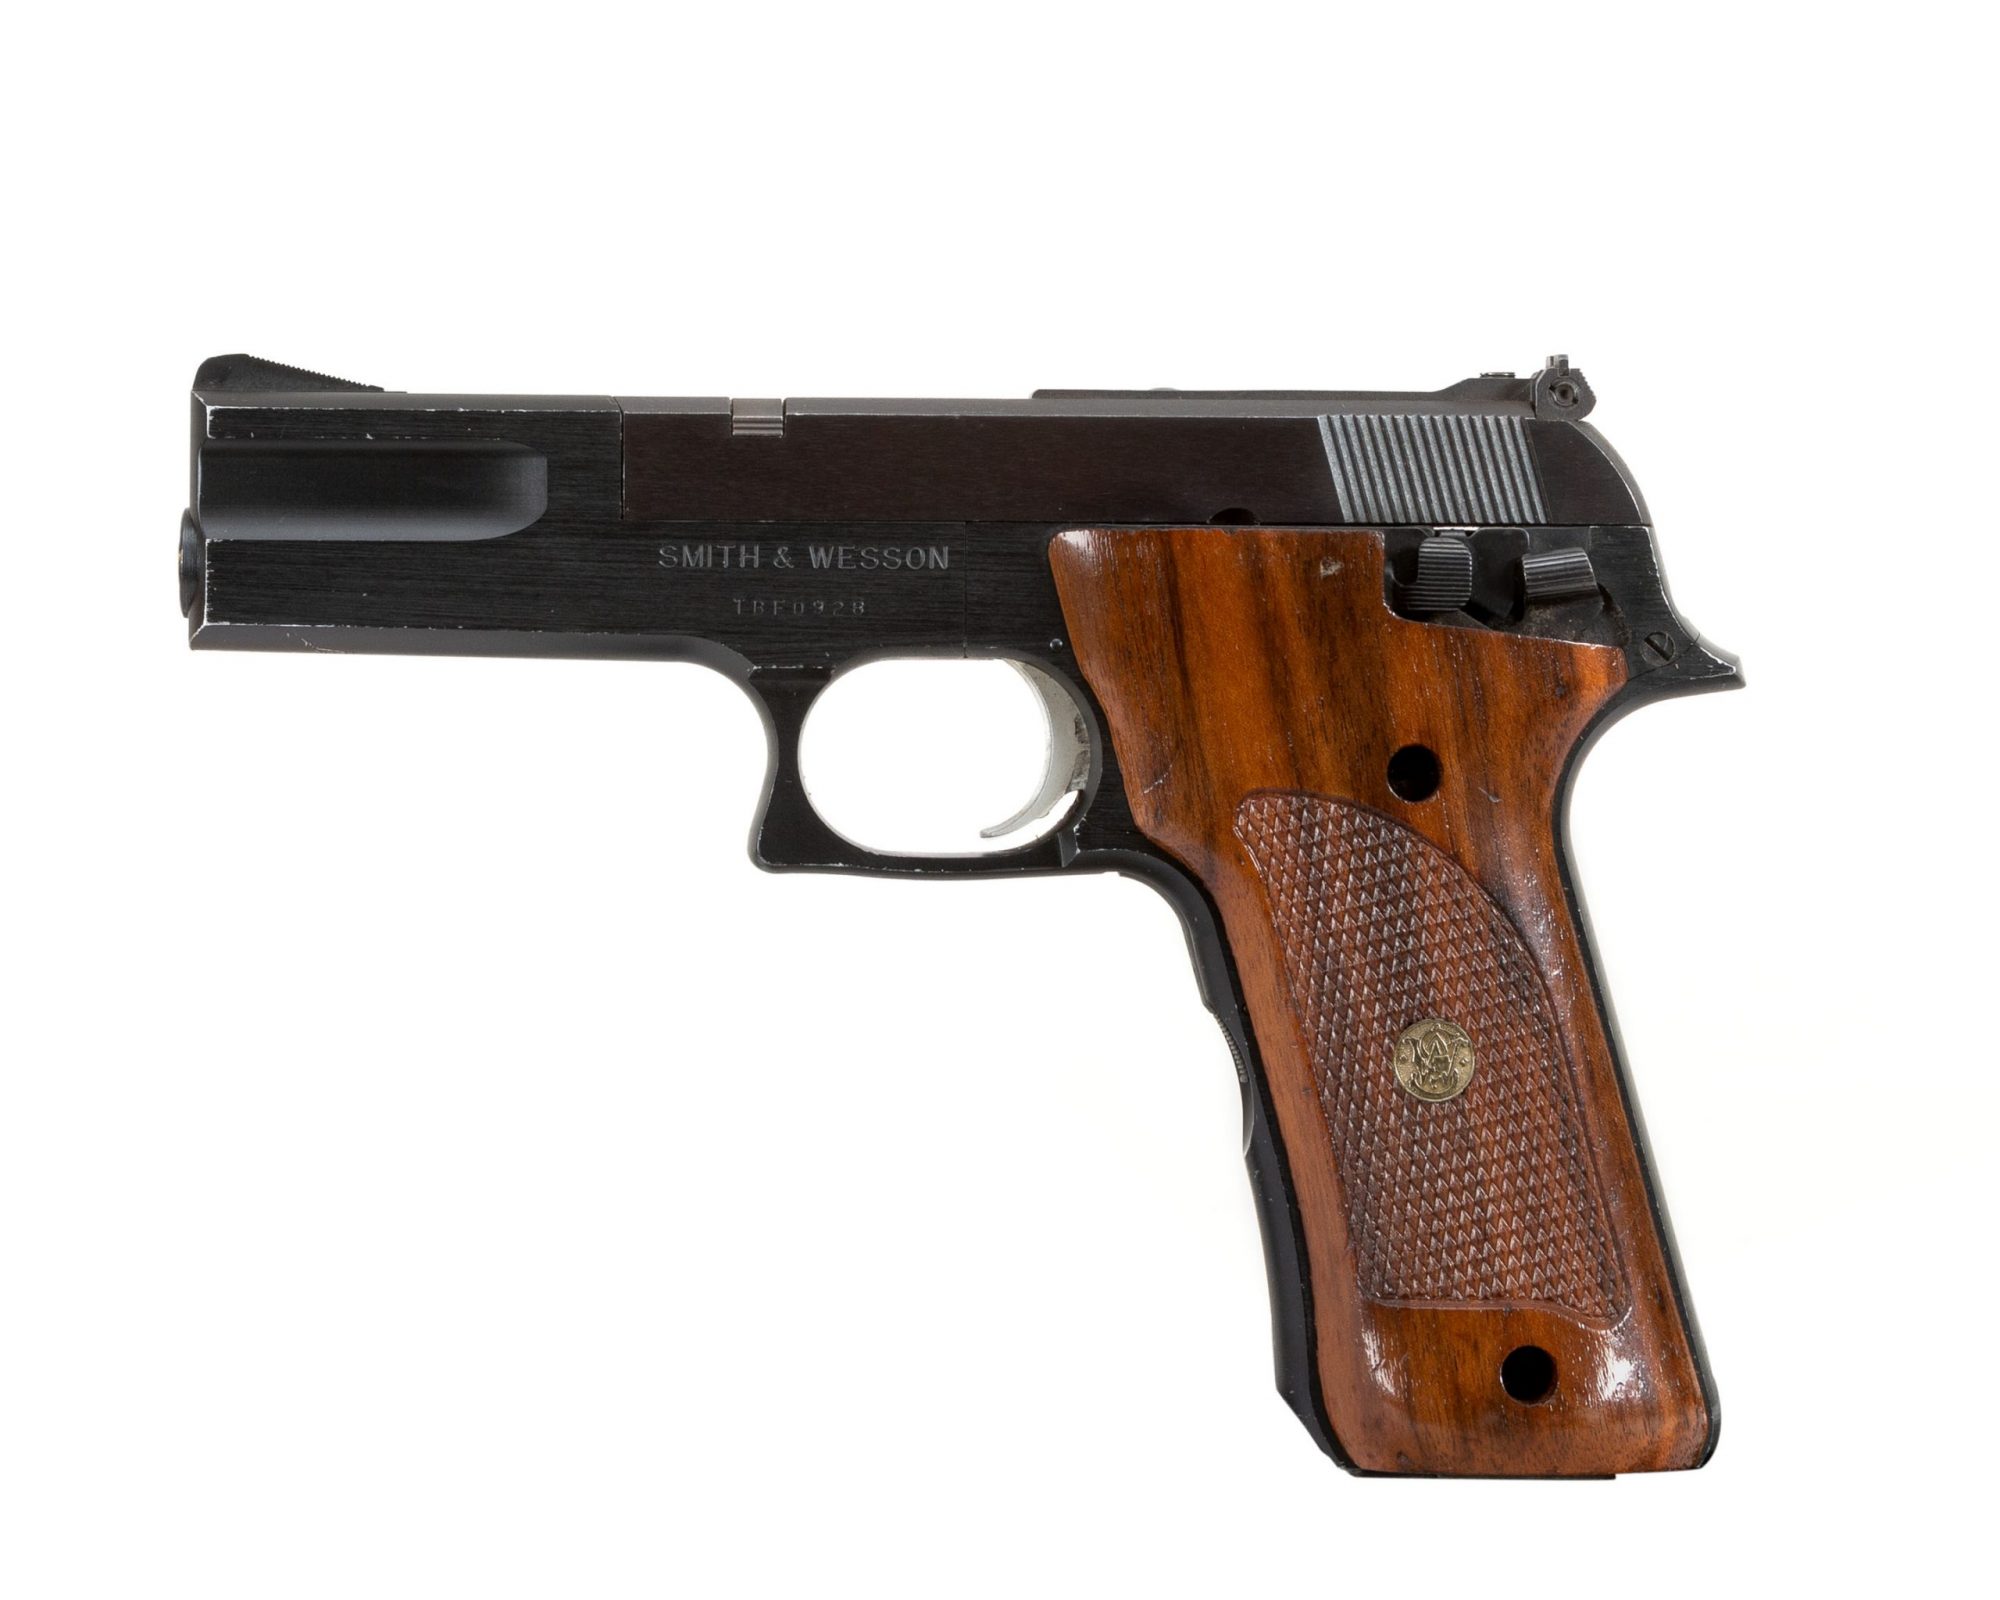 Photo of a pre-owned Smith & Wesson Model 422, for sale by Turnbull Restoration of Bloomfield, NY